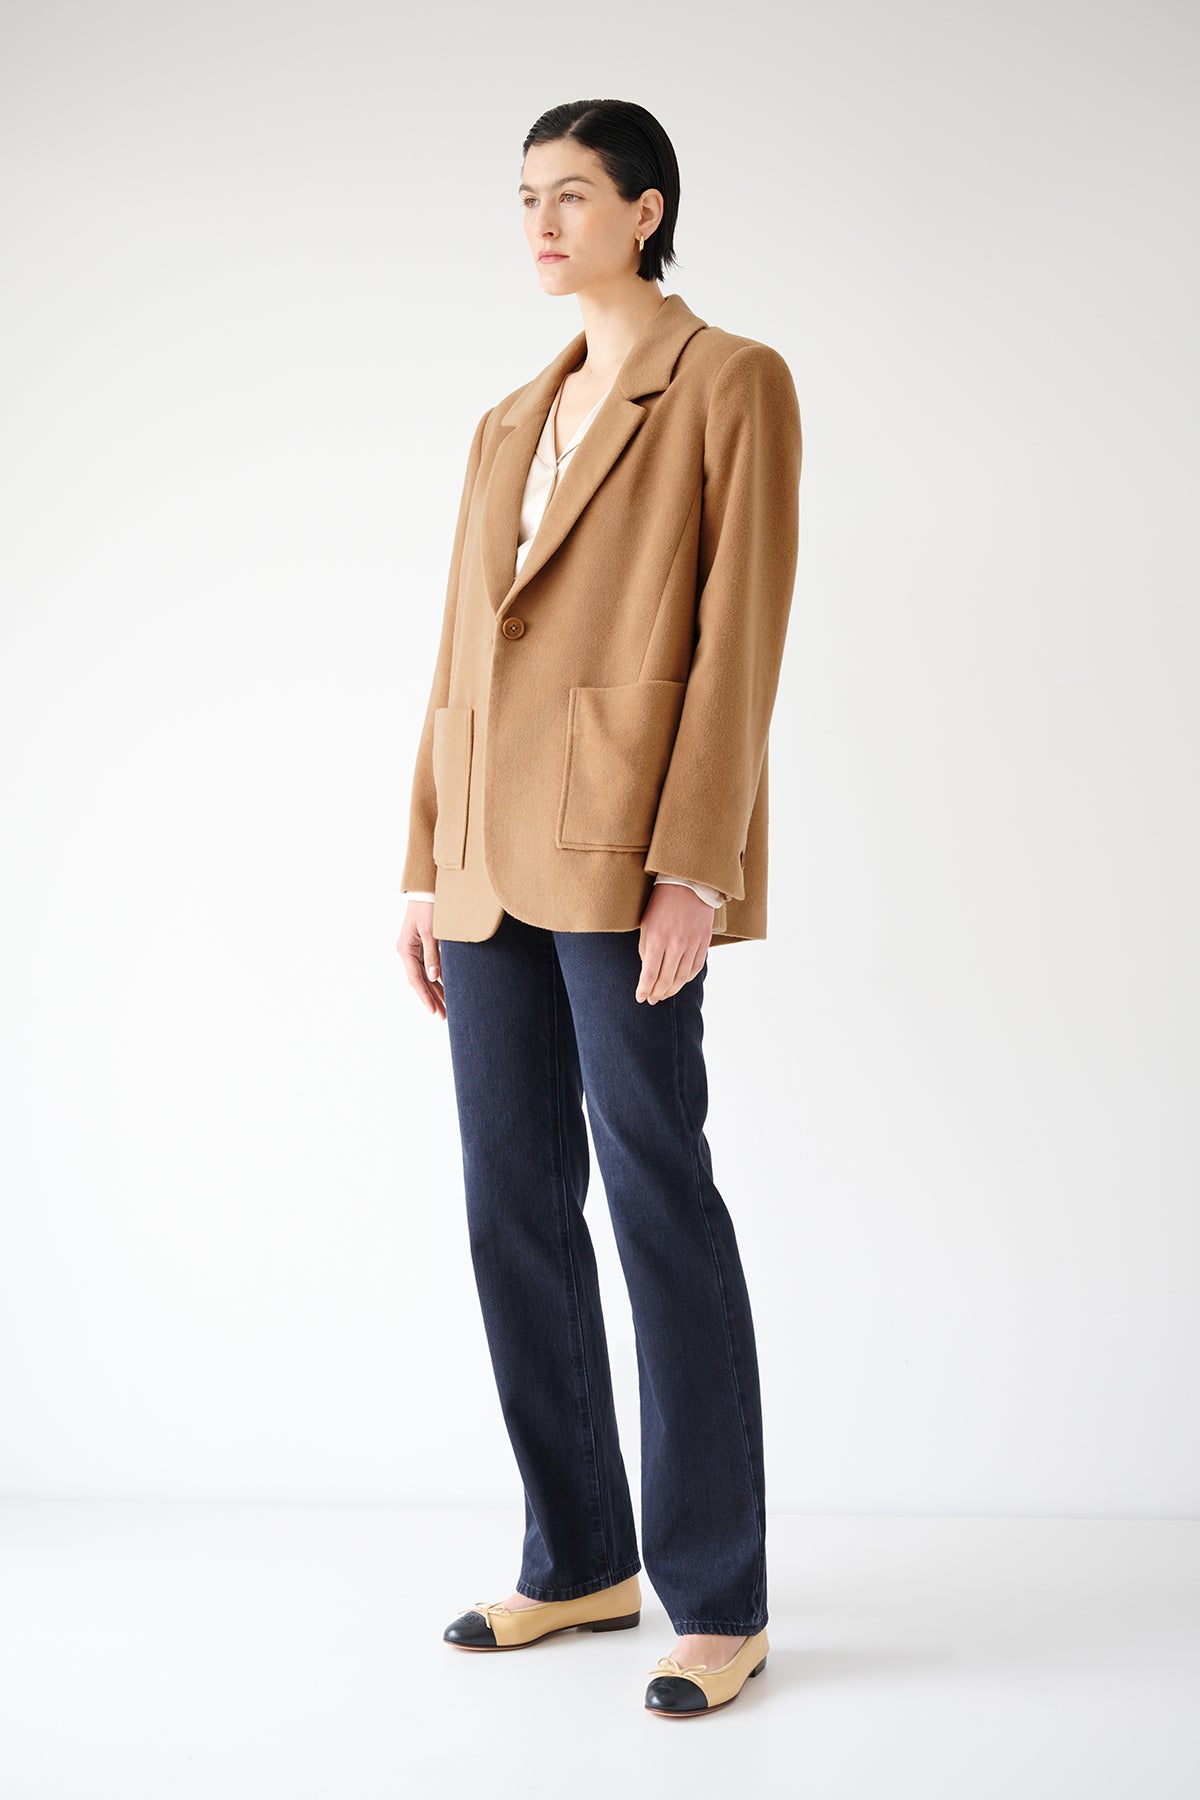 An oversized woman wearing a Velvet by Jenny Graham ALAMOS BLAZER in camel wool blend and blue jeans.-35547423703233